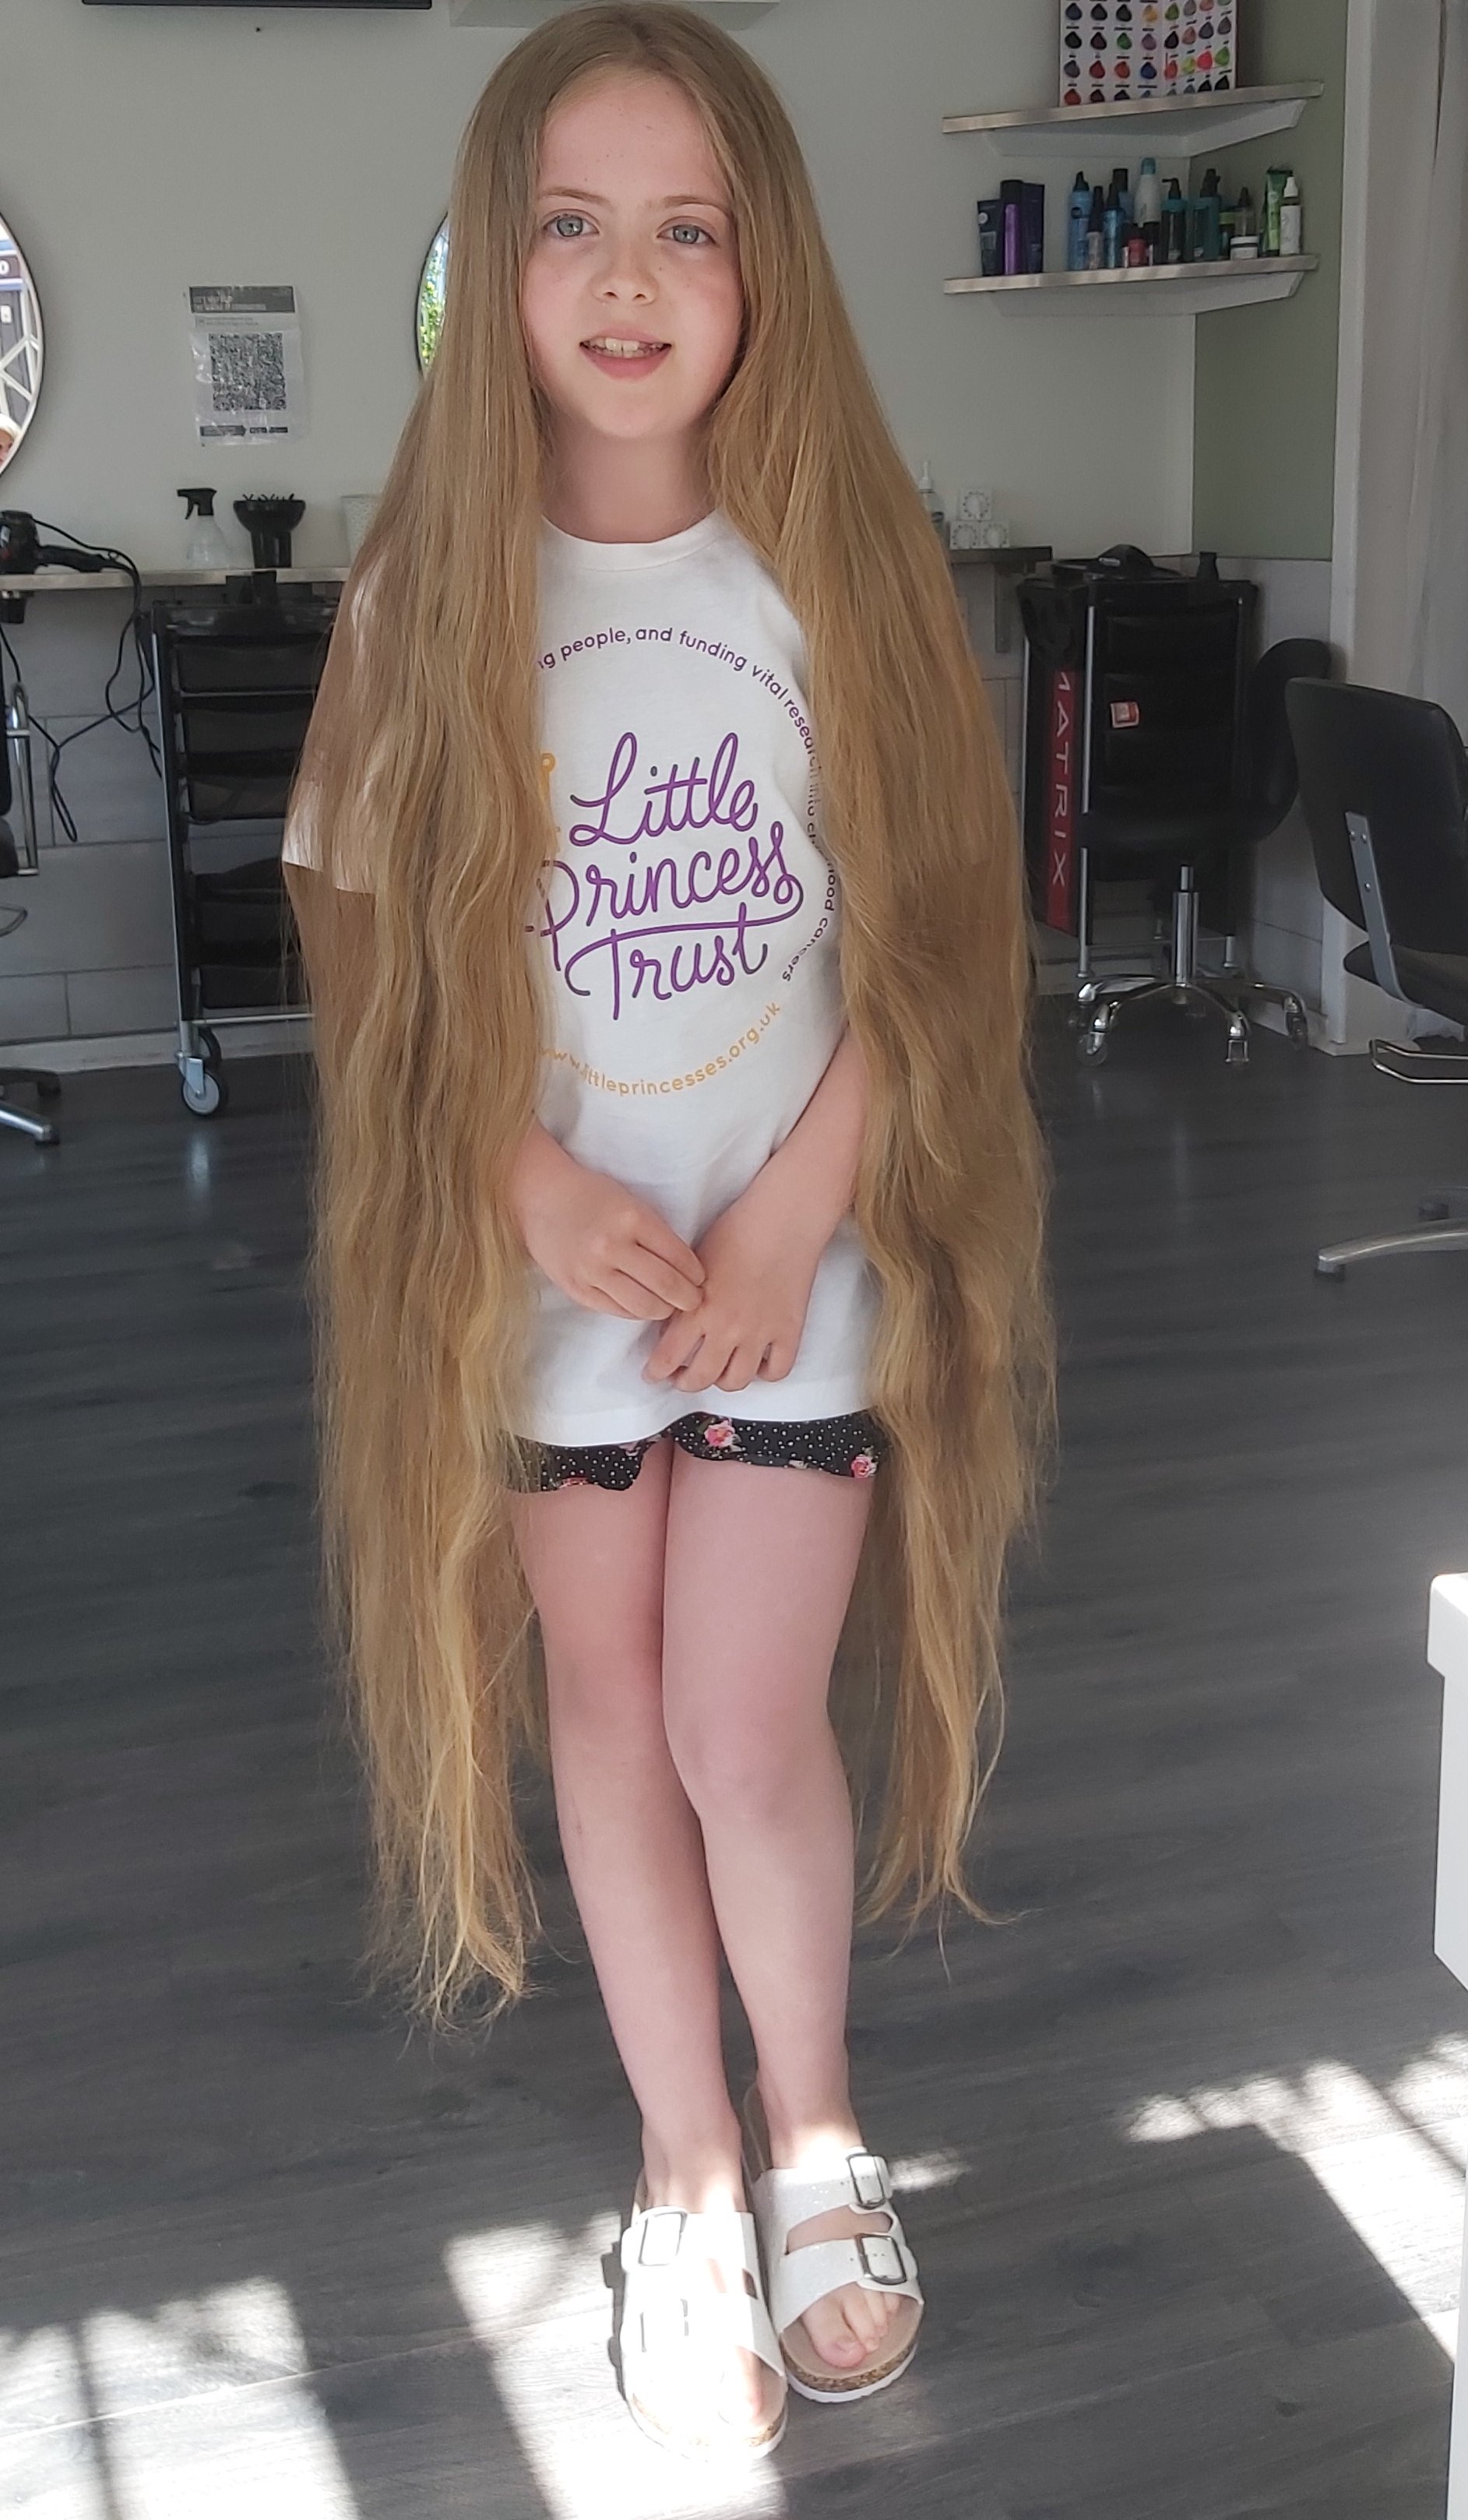 Darcy Crothers donated 19 inches of hair and raised £859 for LPT.